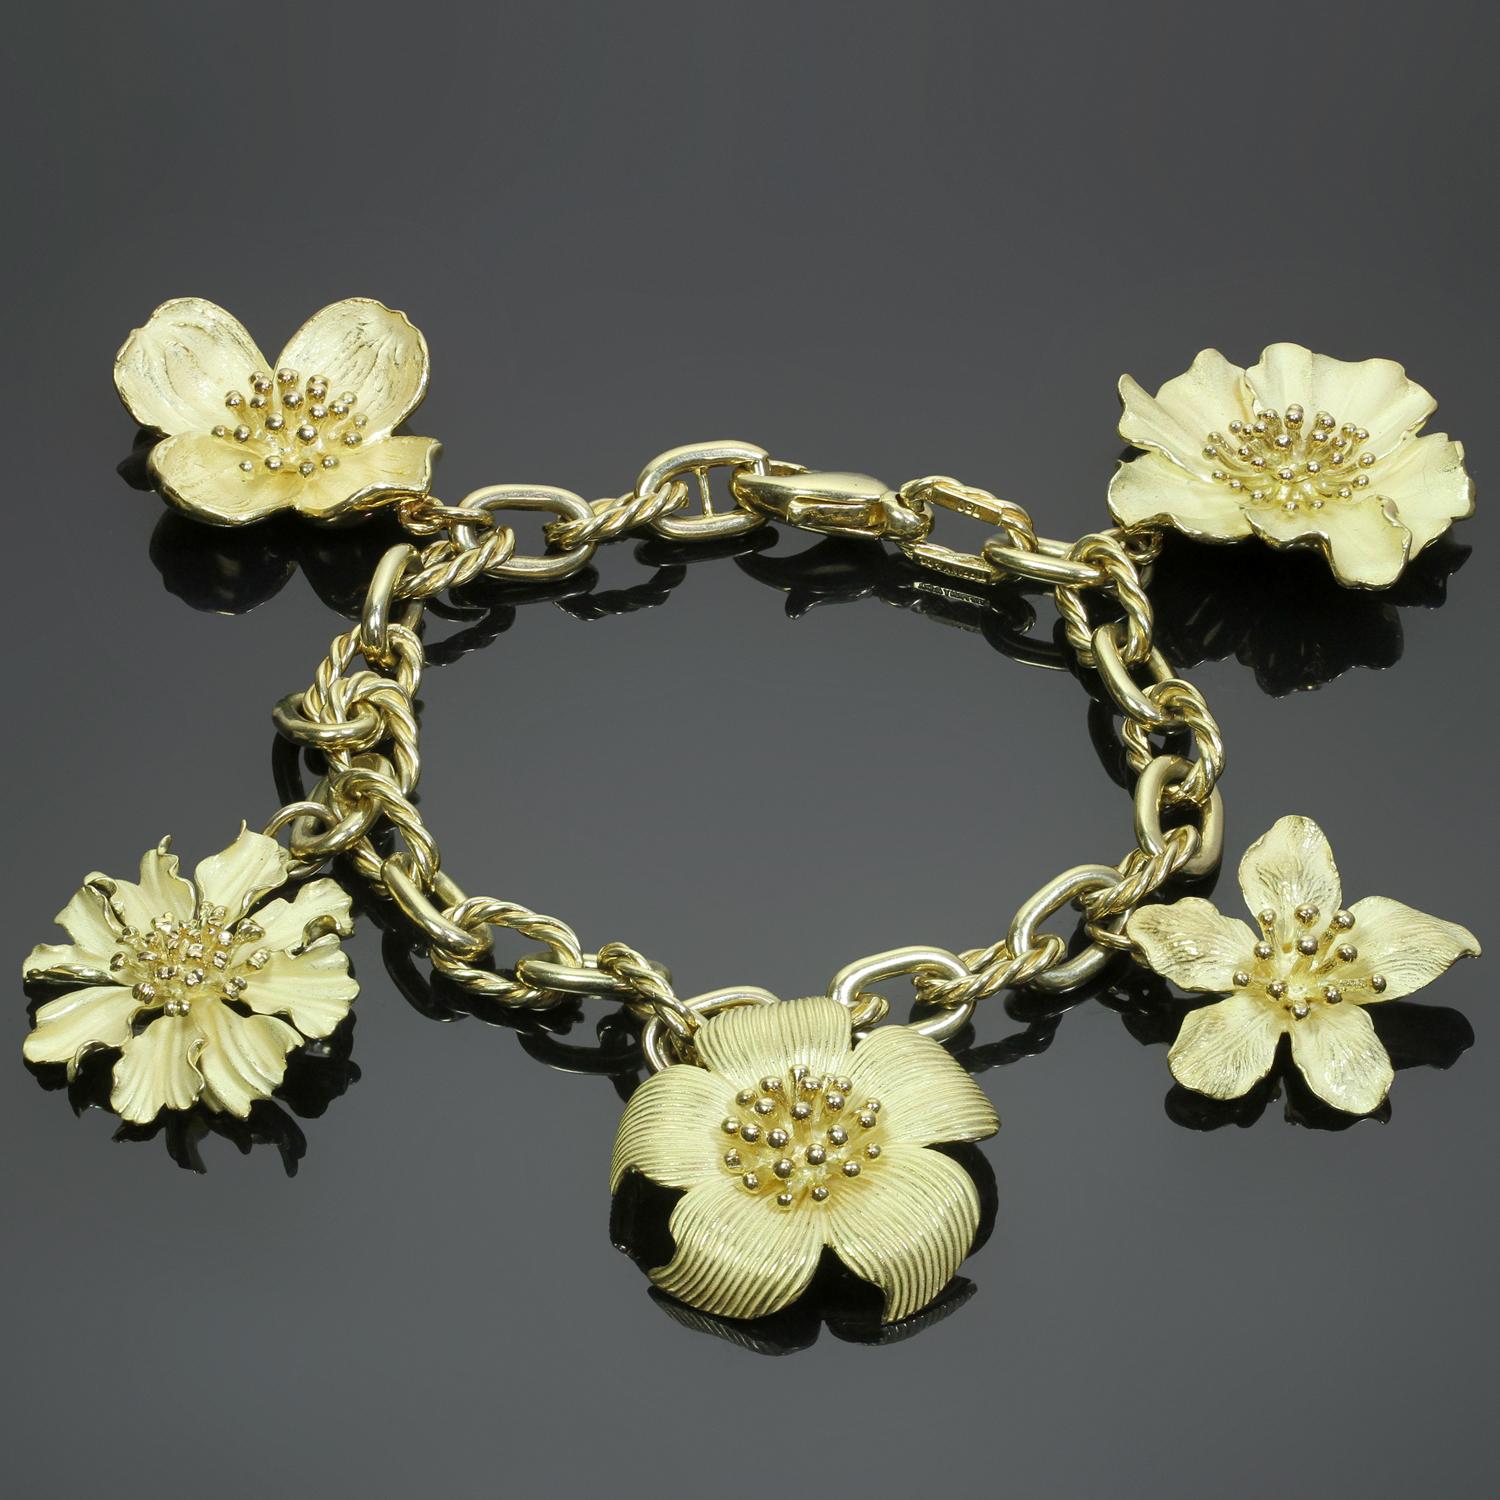 This rare Tiffany & Co. bracelet is crafted in 18k yellow gold and features a fabulous array of 5 Perennial Dogwood flower charms measuring 21.0mm to 26.0mm in length. Made in United States circa 2000s. Measurements: 7.5